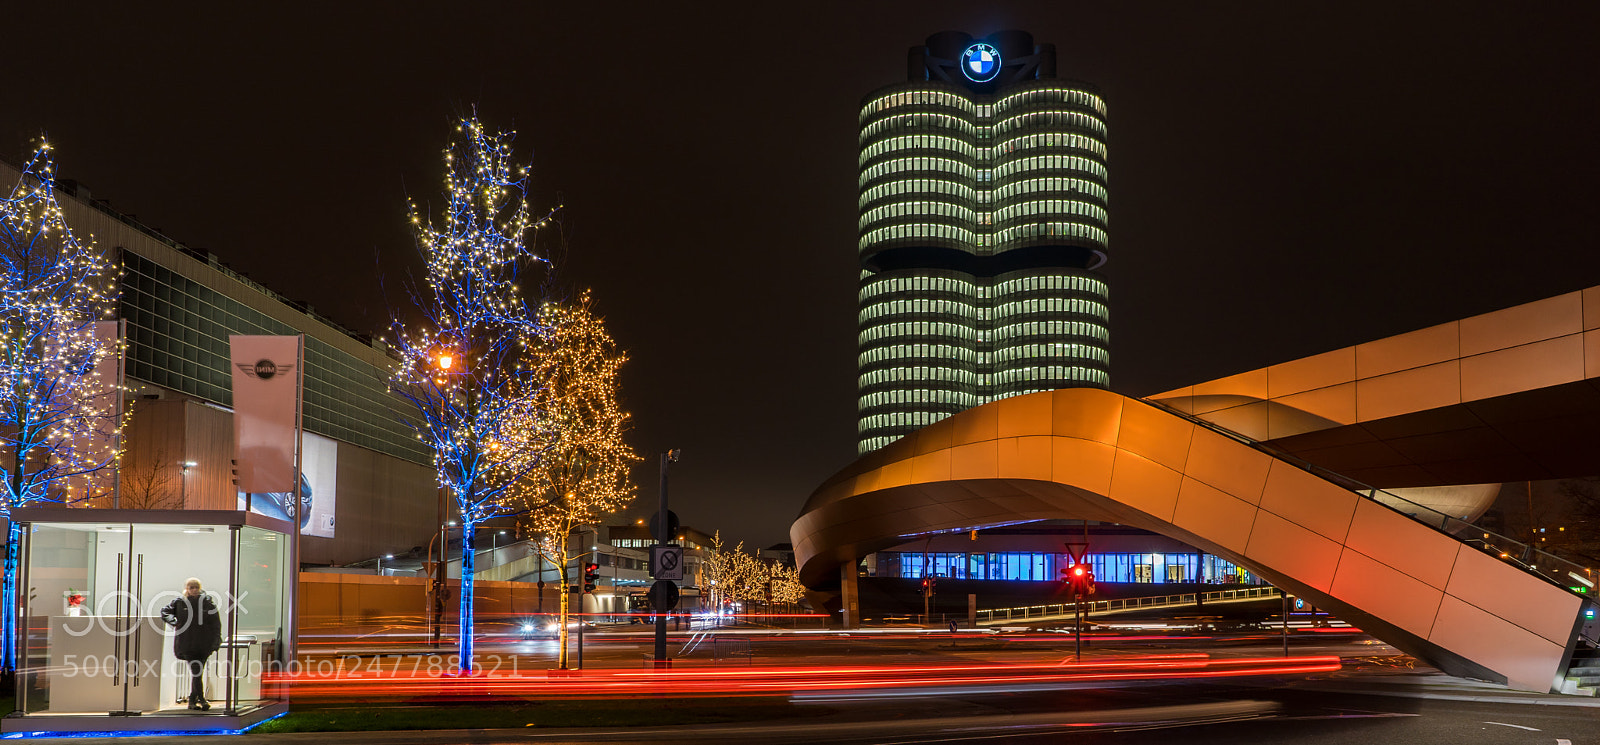 Sony a7 sample photo. Bmw tower photography